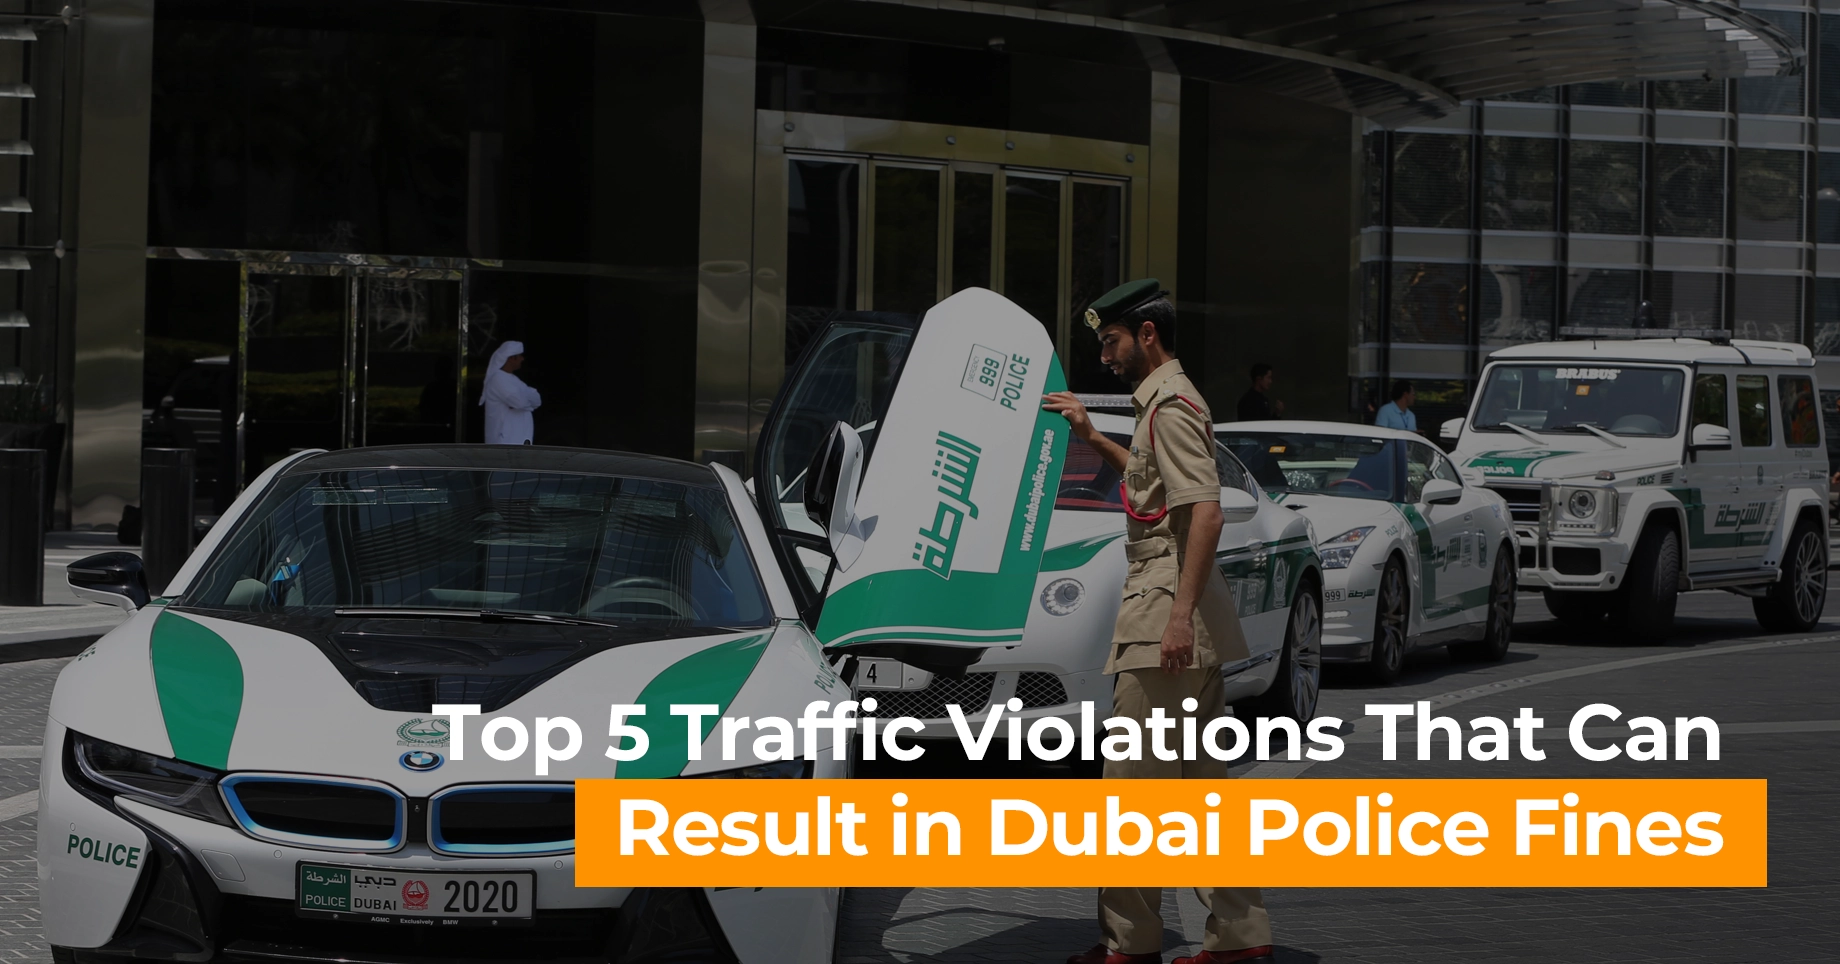 Top 5 Traffic Violations That Can Result in Dubai Police Fines